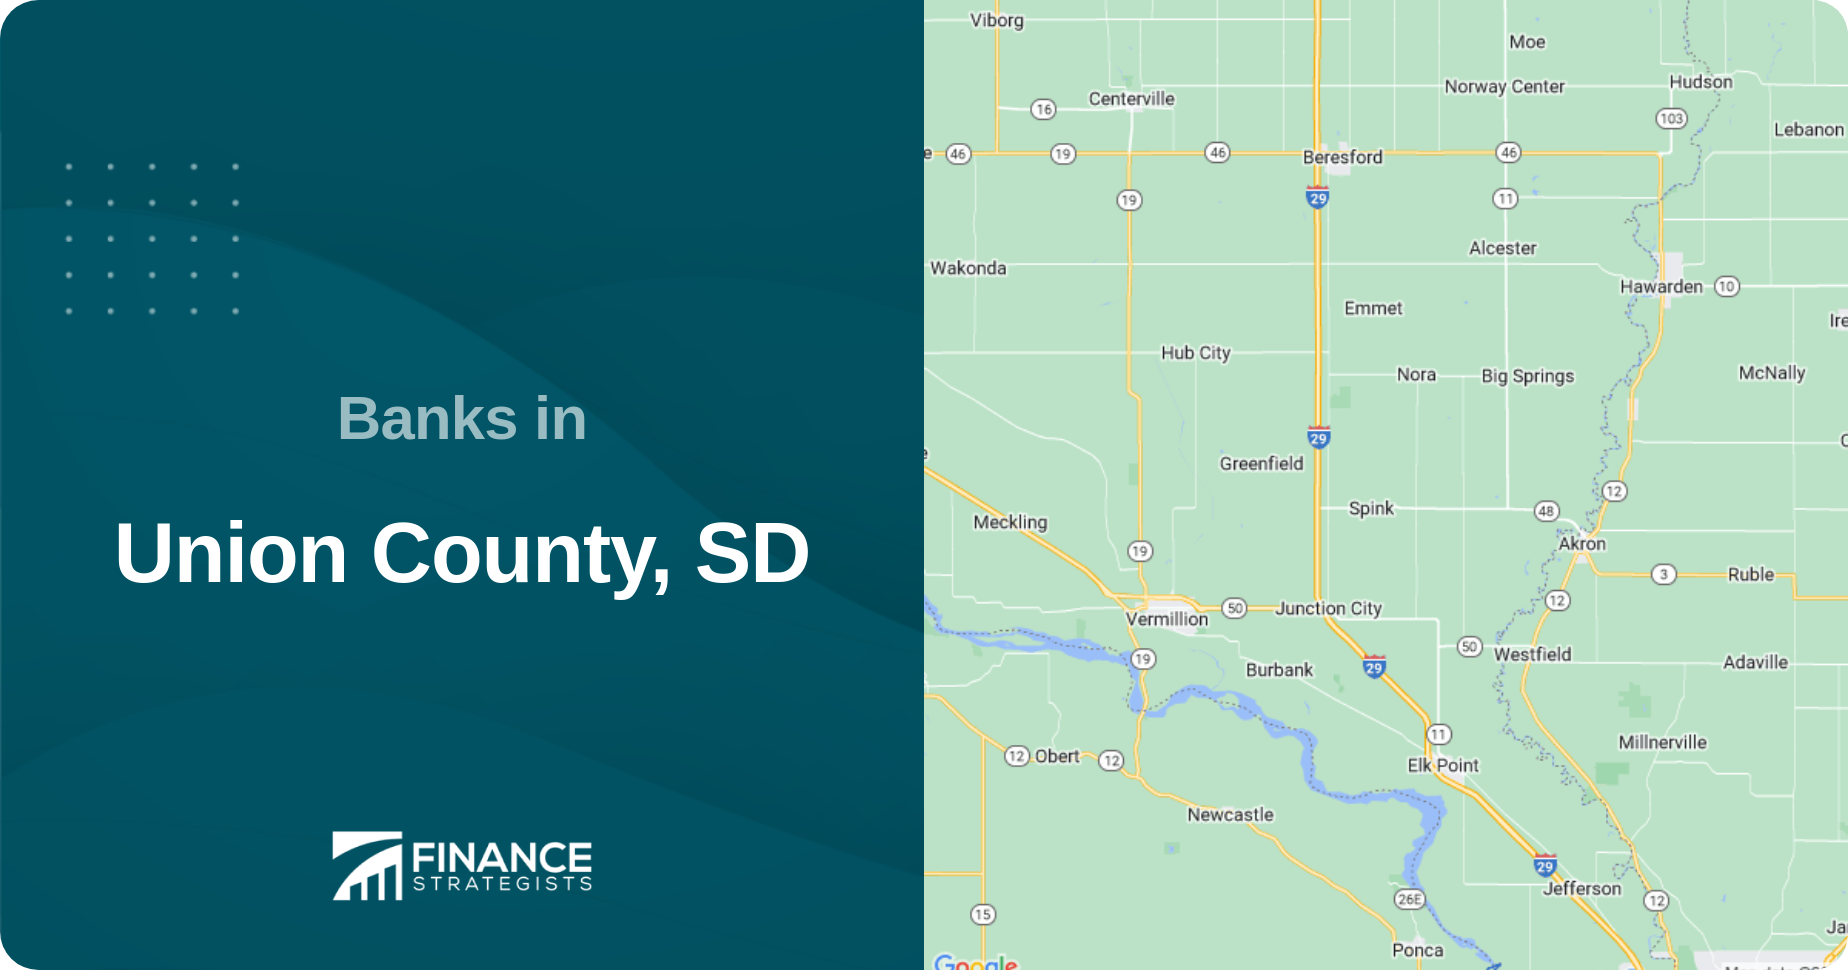 Banks in Union County, SD